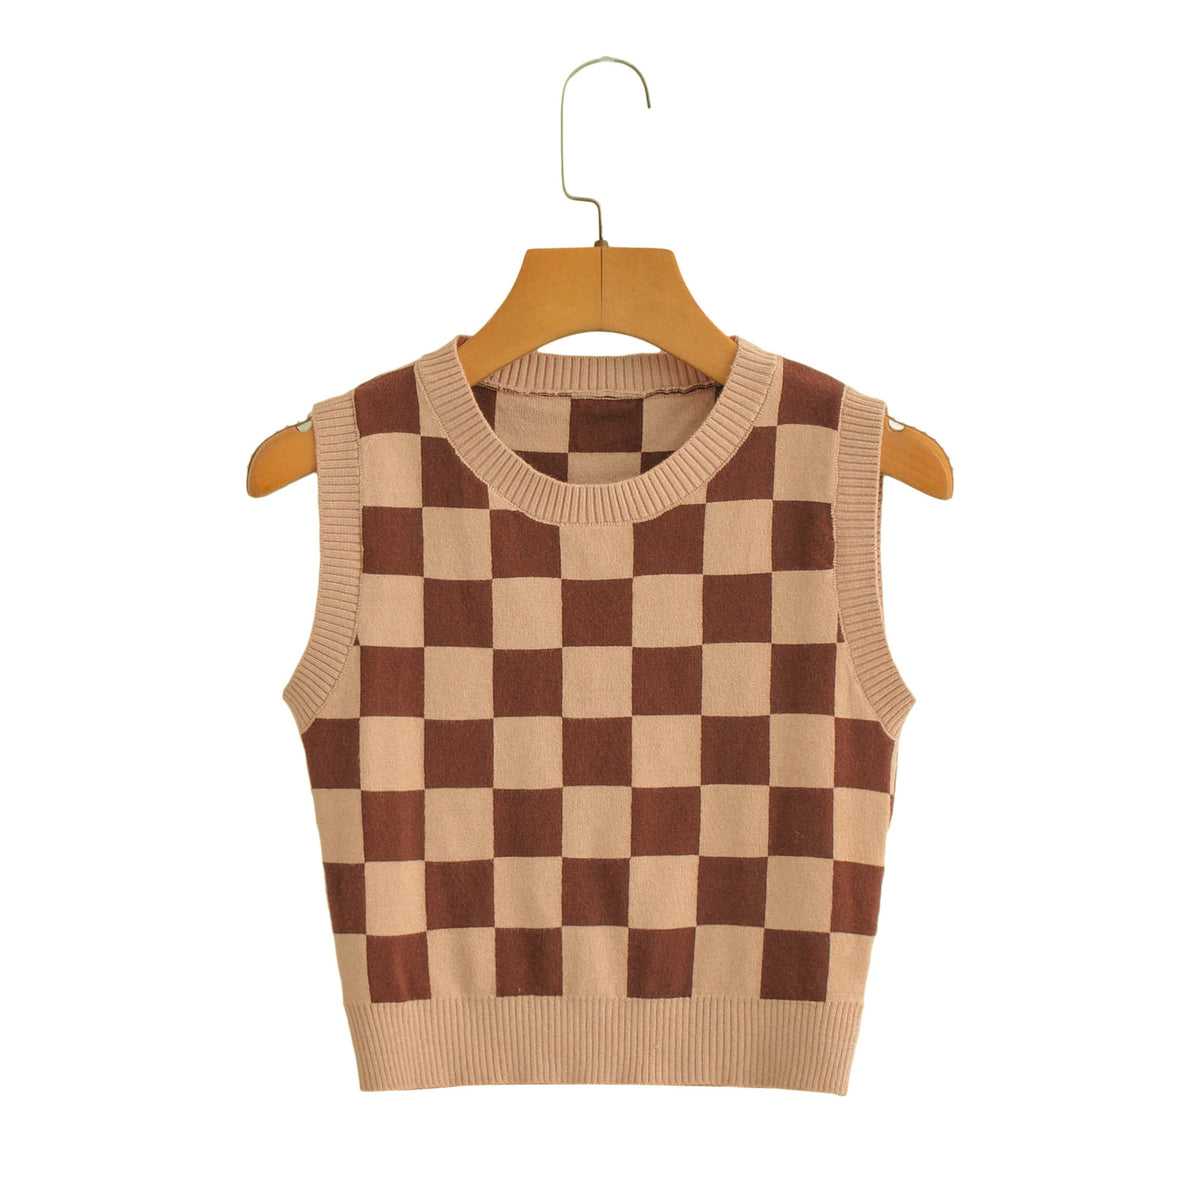 Urban Casual Women Chessboard Plaid Knitted Vest